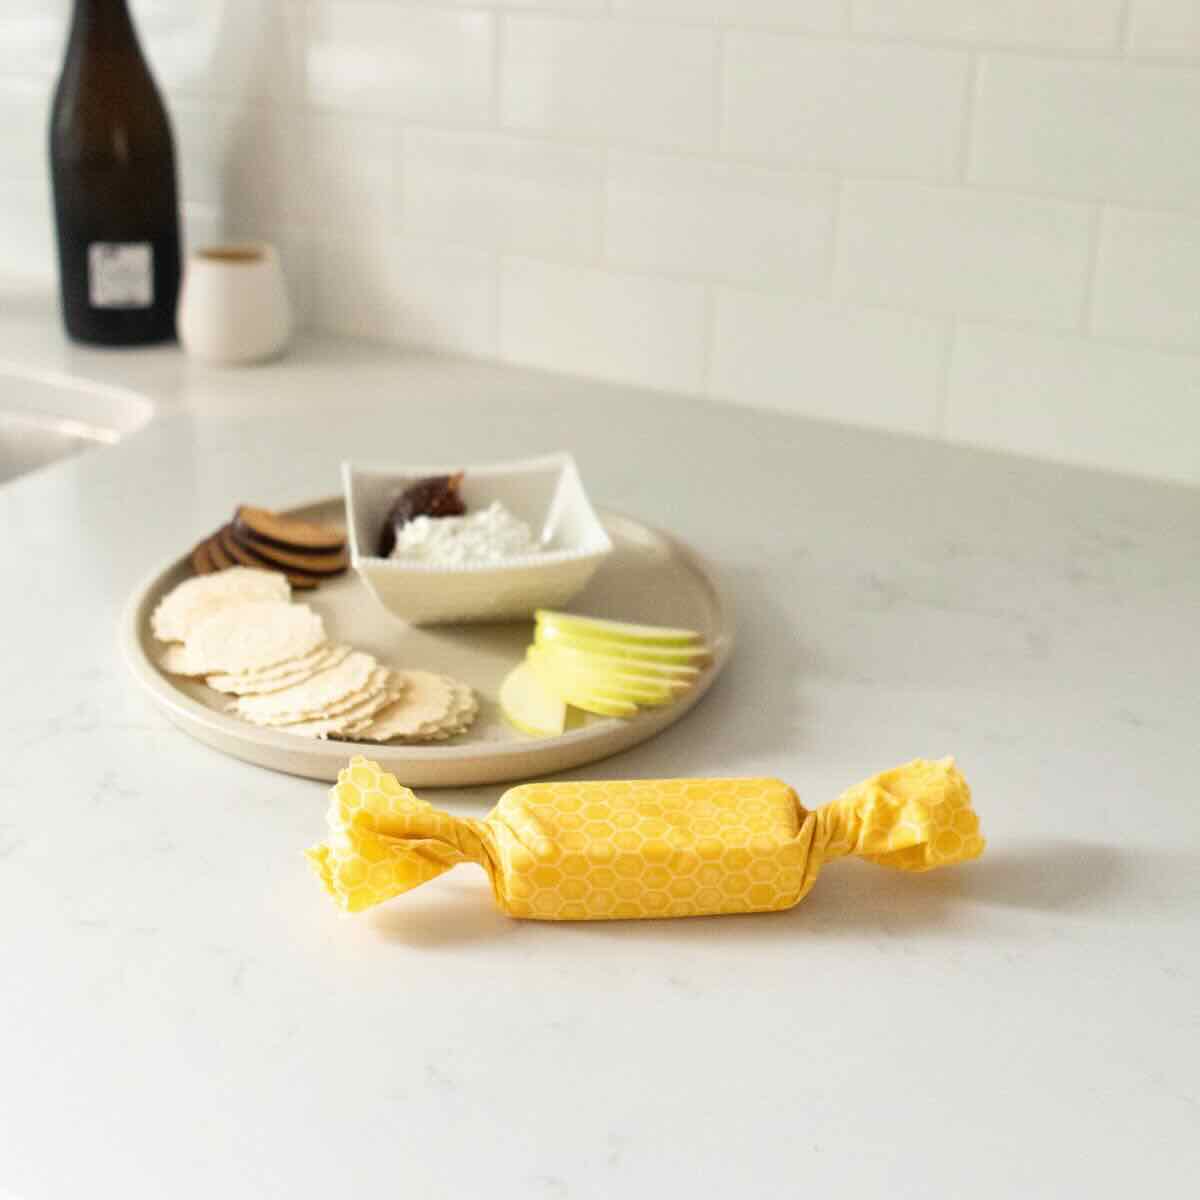 Cheese wrapped in a yellow Goldilocks honeycomb themed beeswax wrap on a concrete kitchen counter top, with cheese and crackers on a plate behind it.